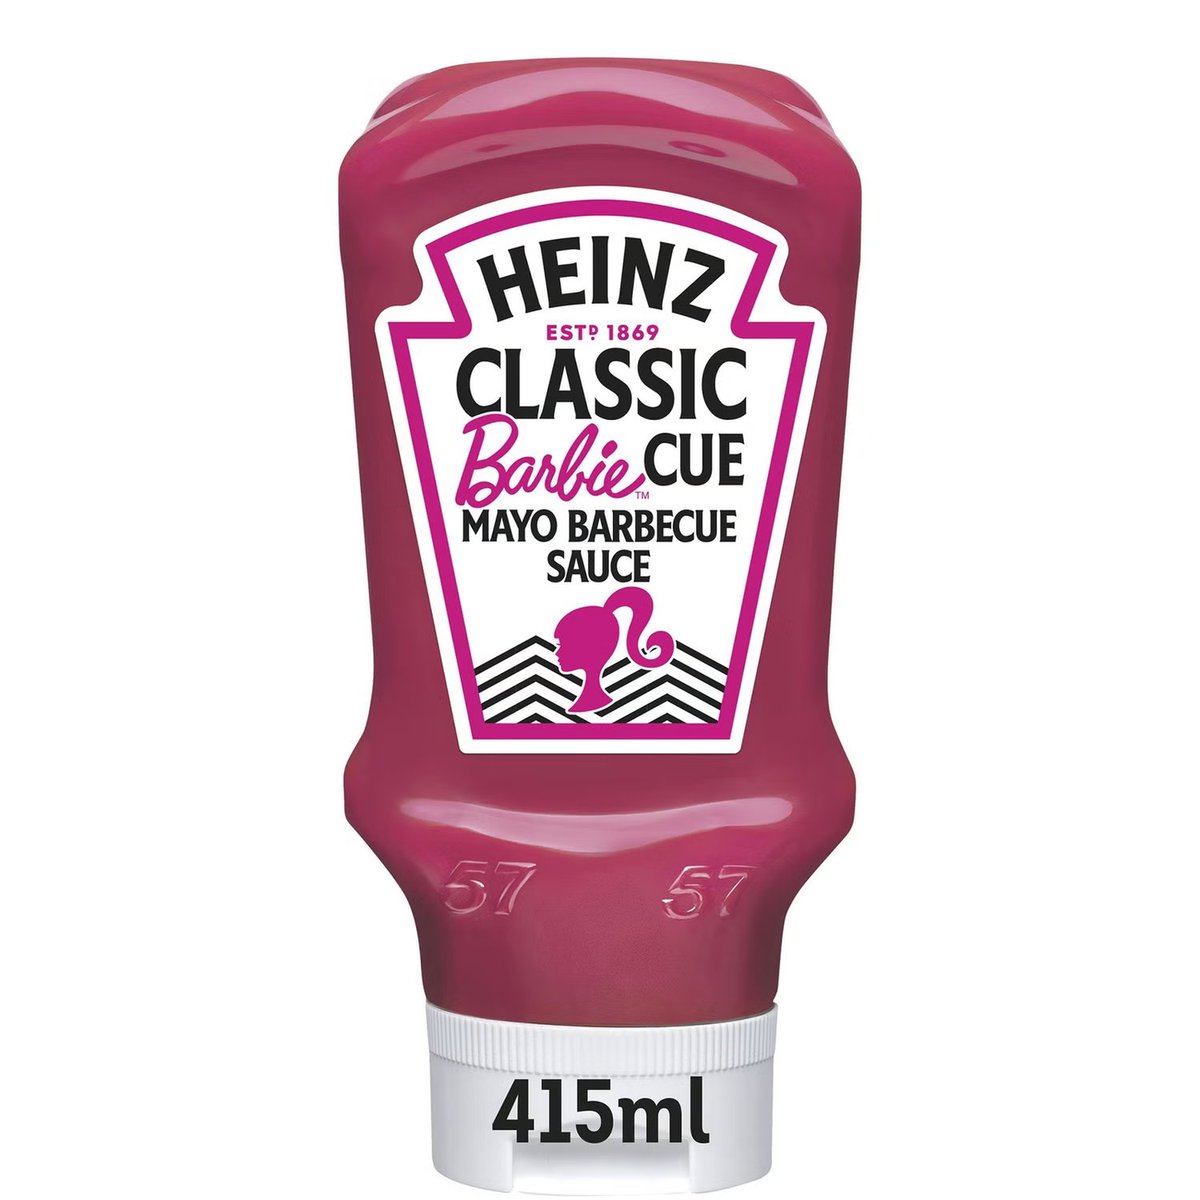 Heinz Classic Barbie Cue Mayo Barbecue Sauce: low protein/exchange free